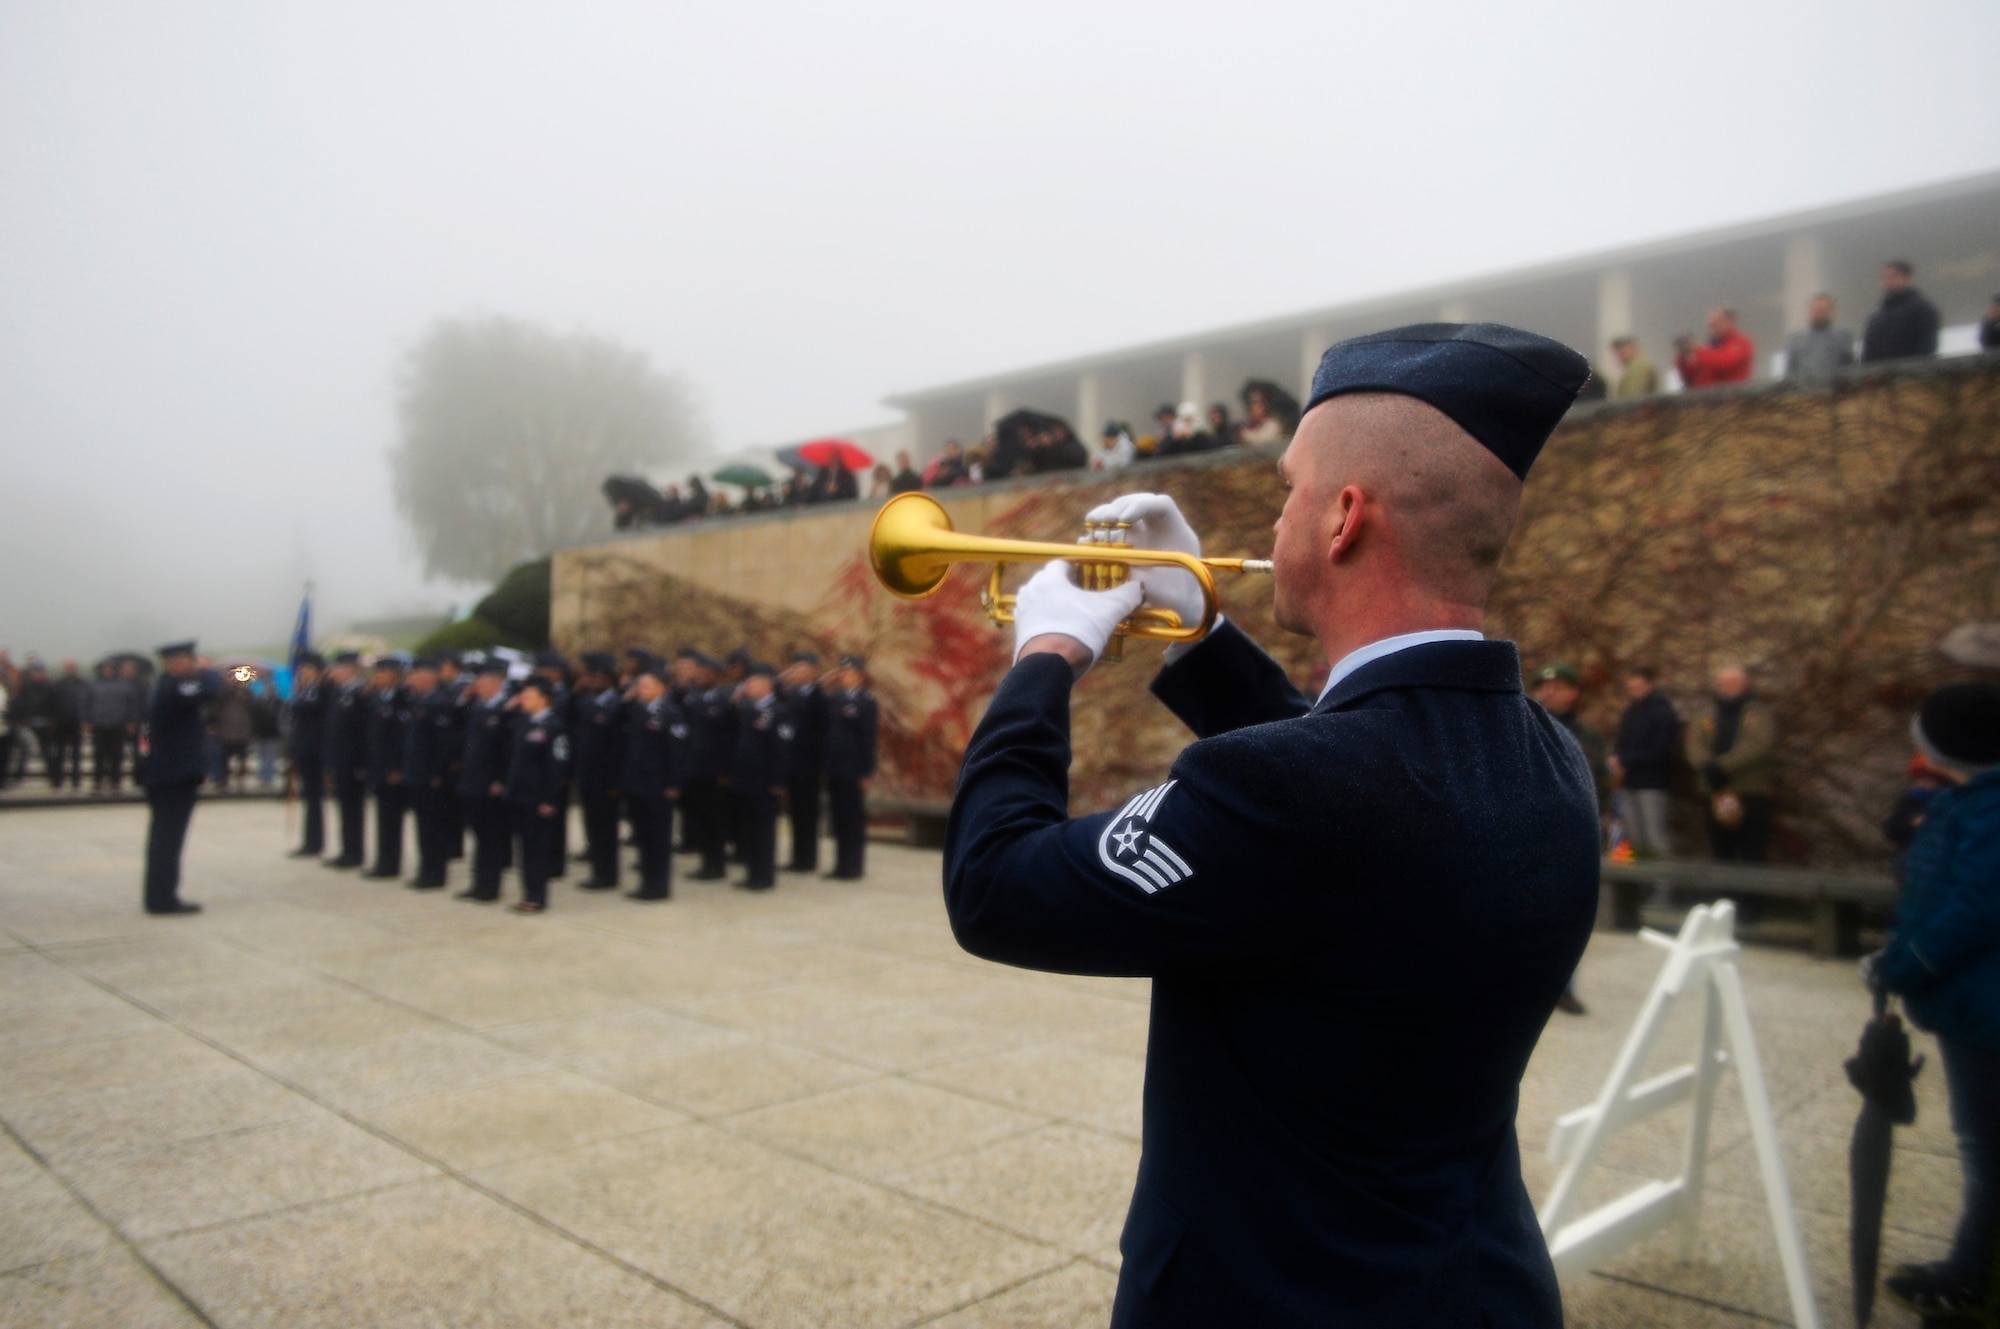 U.S. Air Force Staff Sgt. Ryan Wist, 786th Civil Engineer Squadron water and fuel systems maintenance technician, plays the bugle during a Veterans Day ceremony at Henri-Chapelle American Cemetery and Memorial, Belgium, Nov. 11, 2017. Despite inclement weather, more than 100 veterans and civilians turned up for the ceremony. (U.S. Air Force photo by Airman 1st Class Joshua Magbanua)